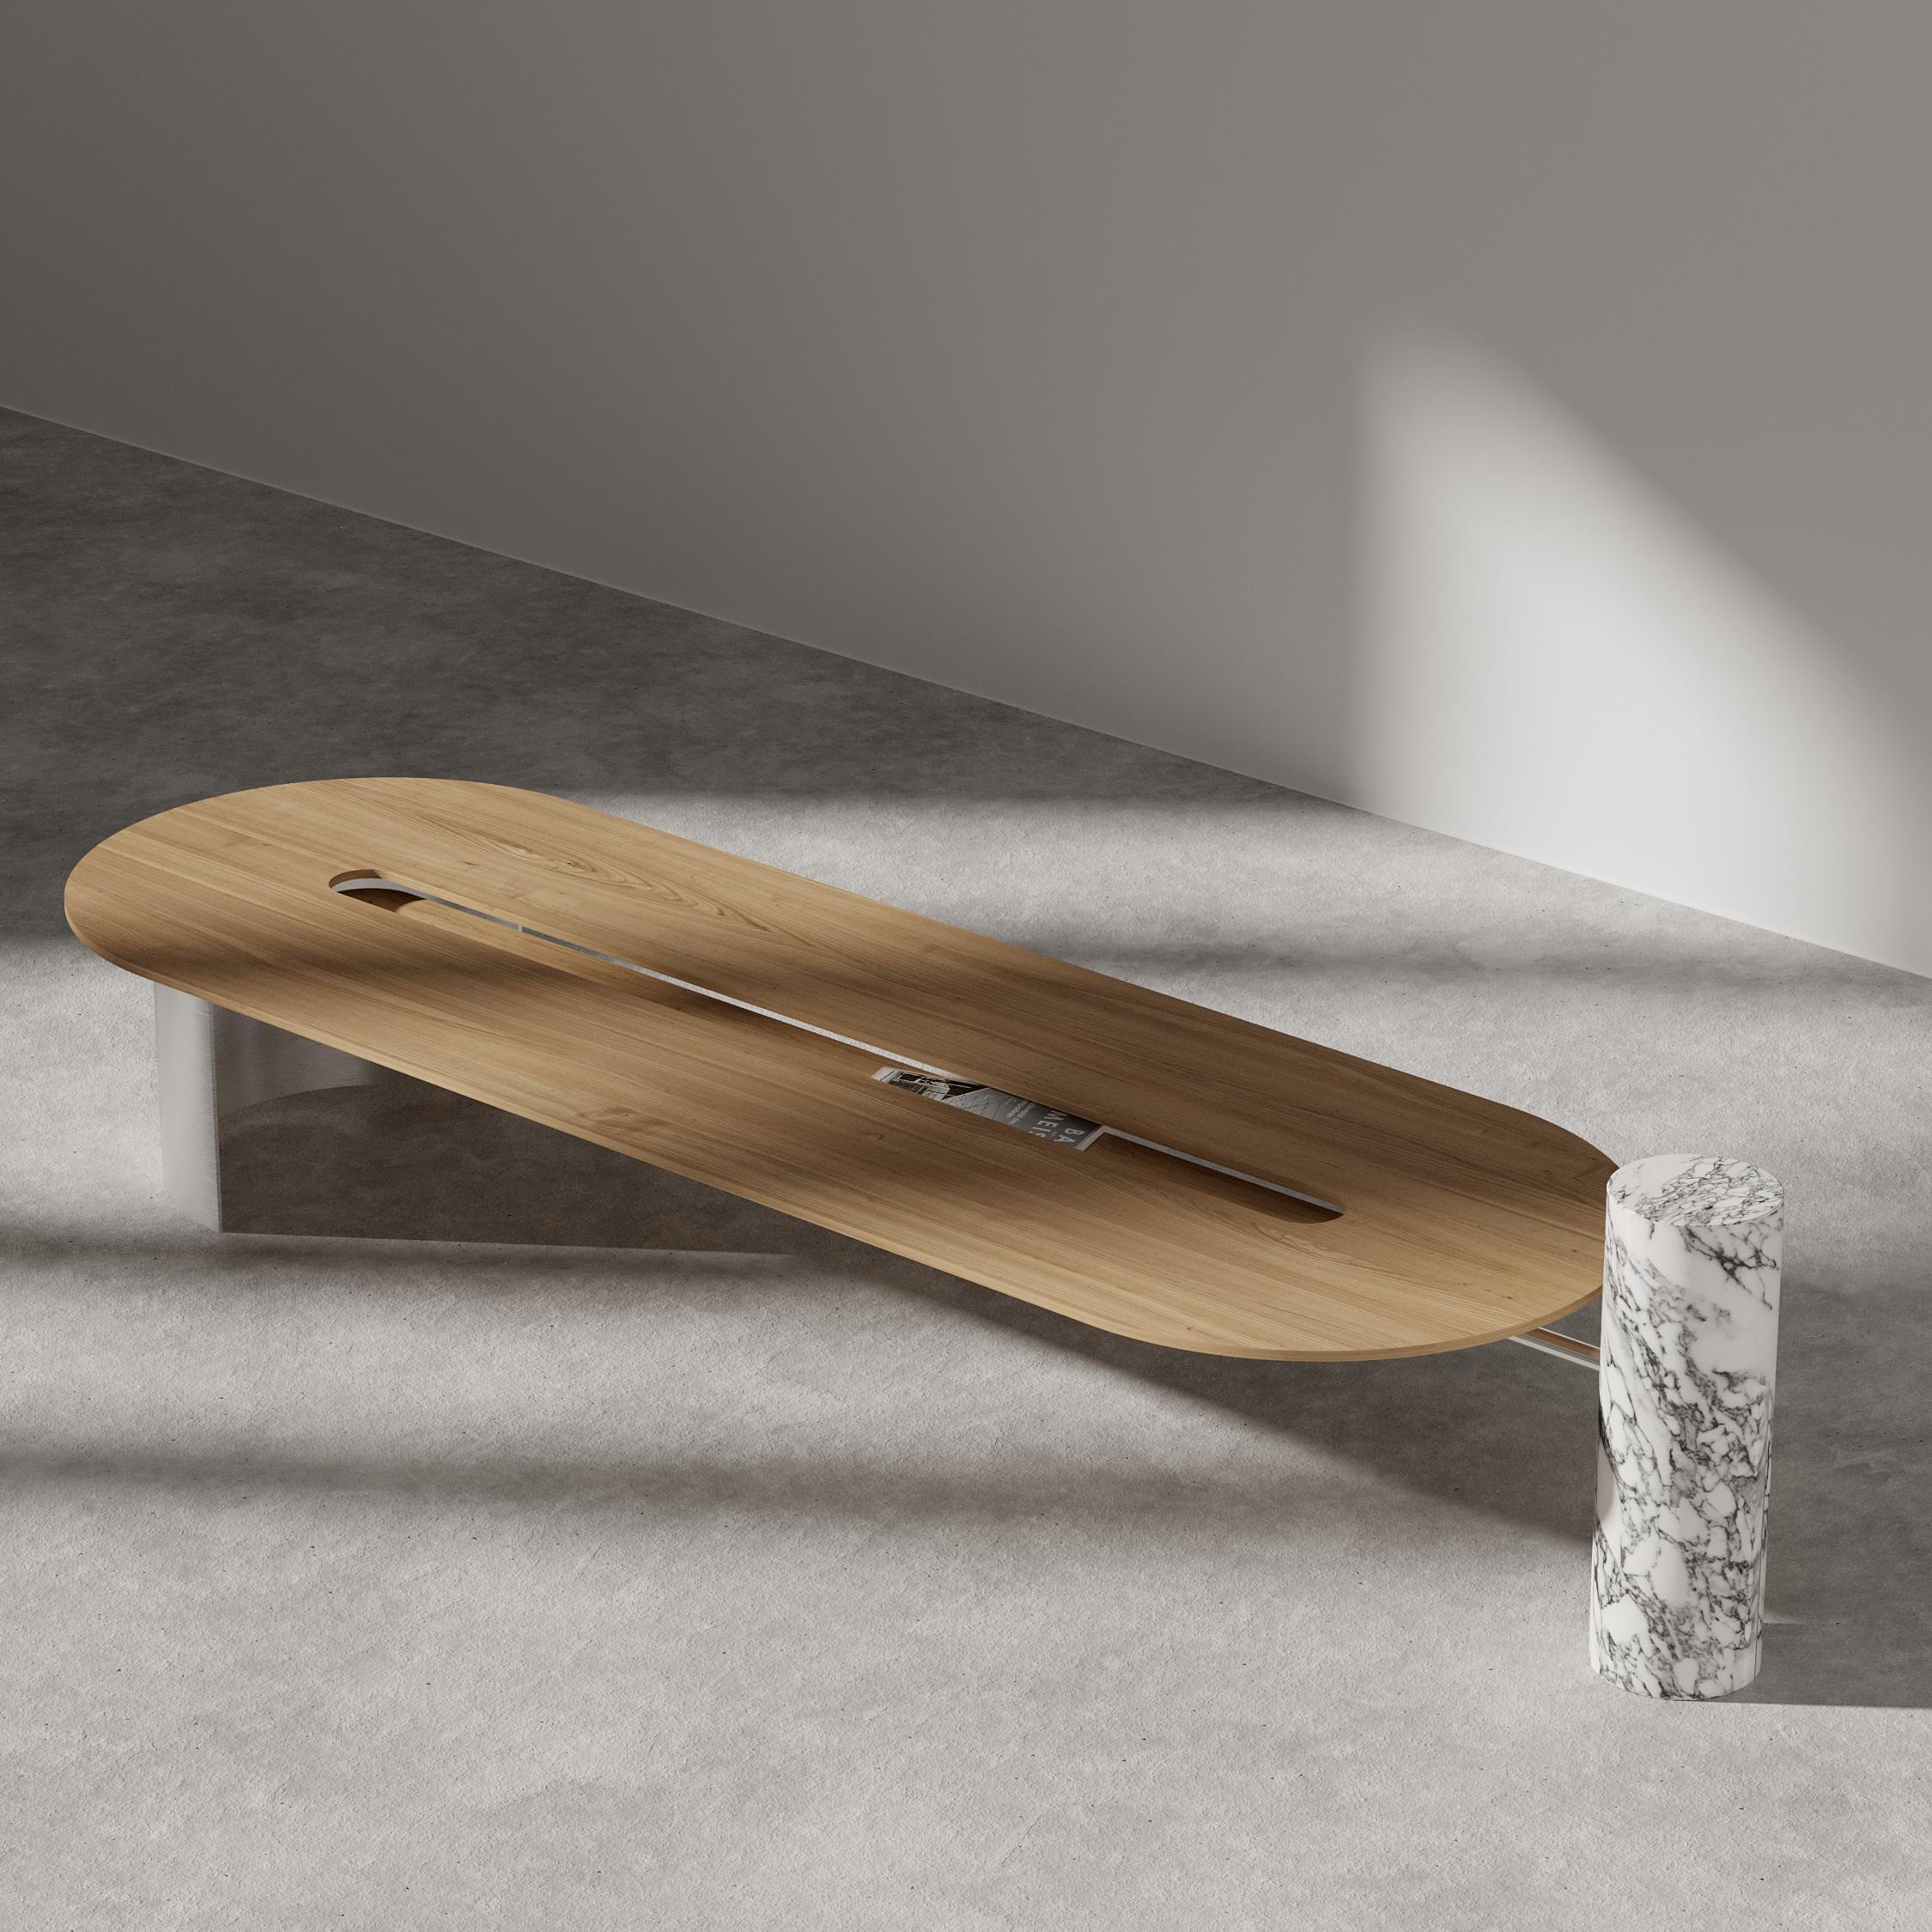 Folliland center table by Borgi Bastormagi
Dimensions: W 195 x D 60 x H 45 cm
Material: French oak, marble, steel

Oval shape wood table with a lower wood level in the center. Structurally it is balanced with a metal curved
structure (0.5cm